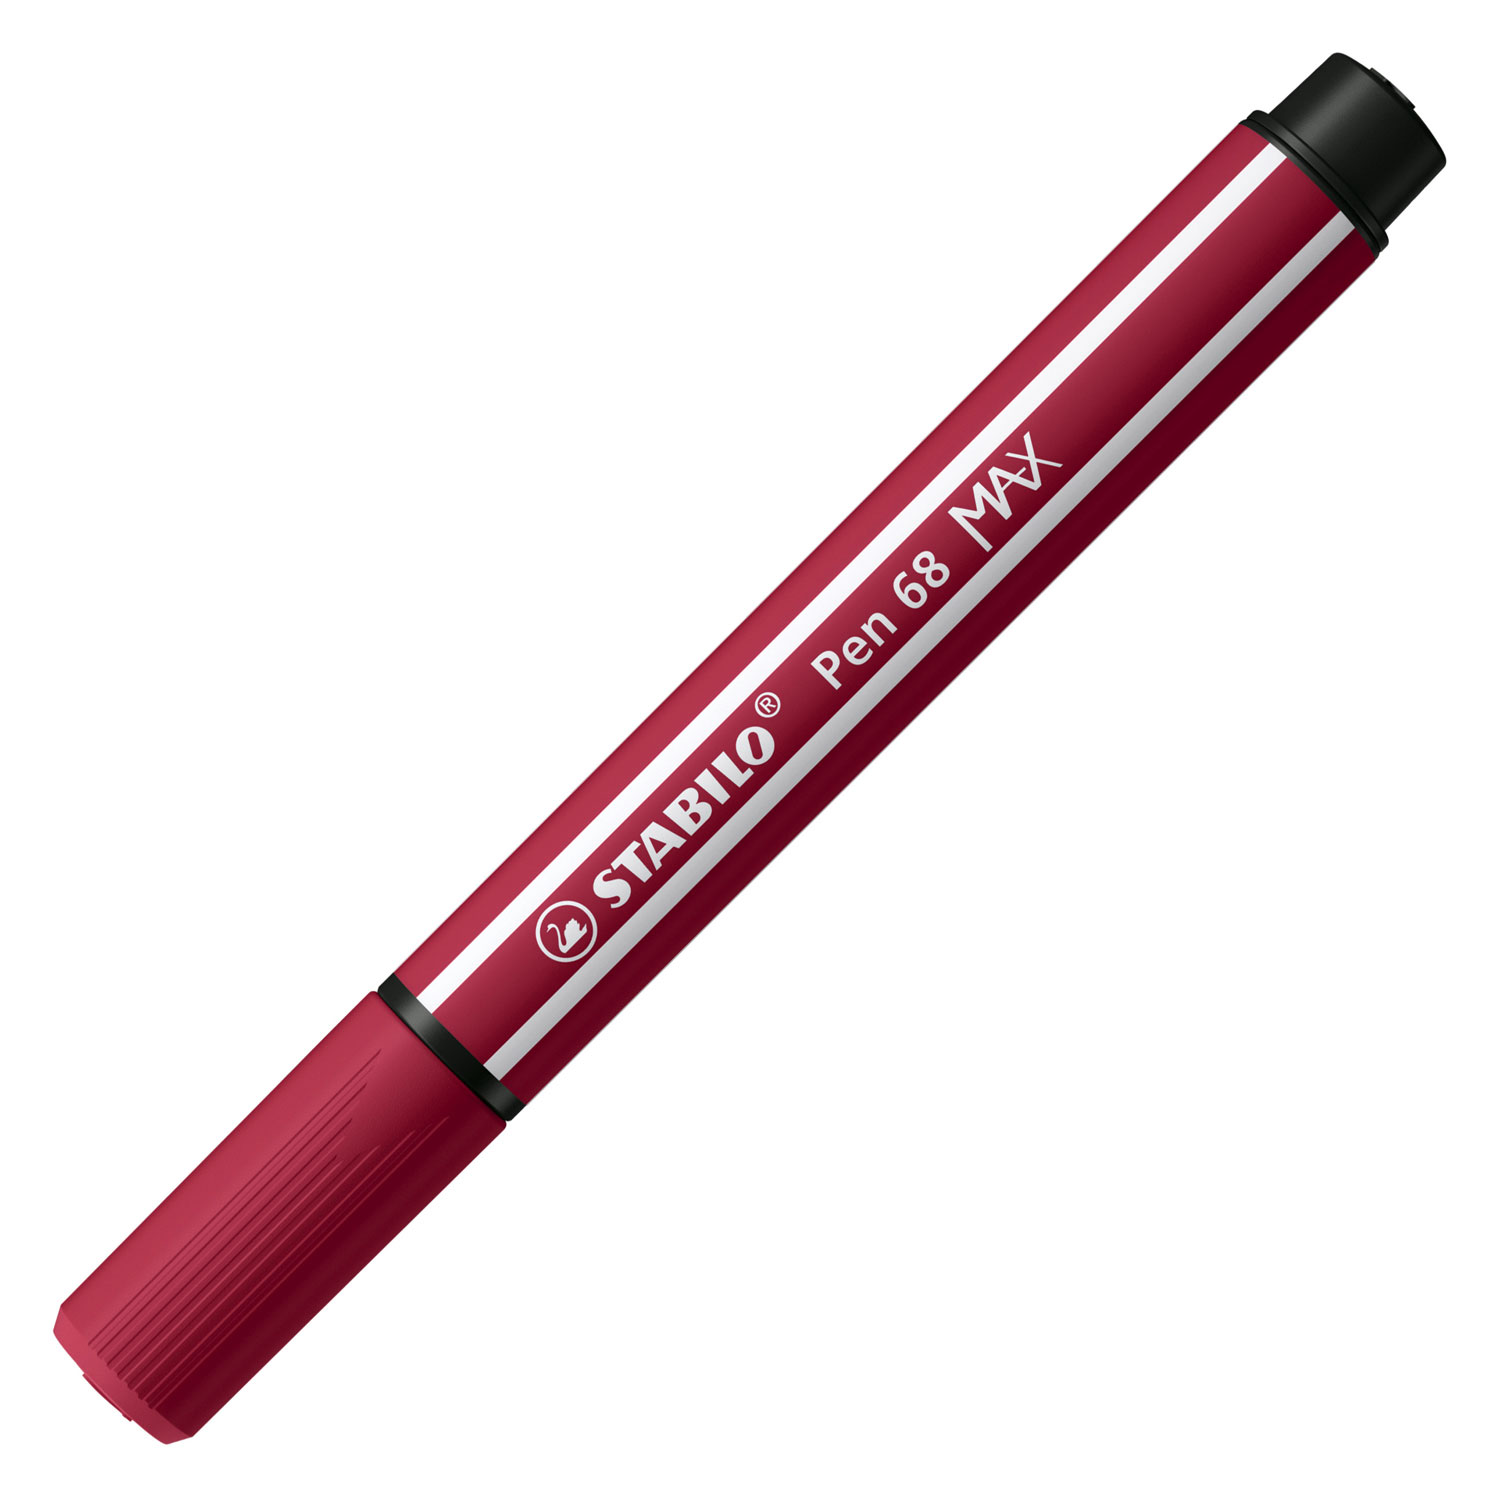 STABILO Pen 68 MAX - Felt-tip pen with thick chisel tip - heather